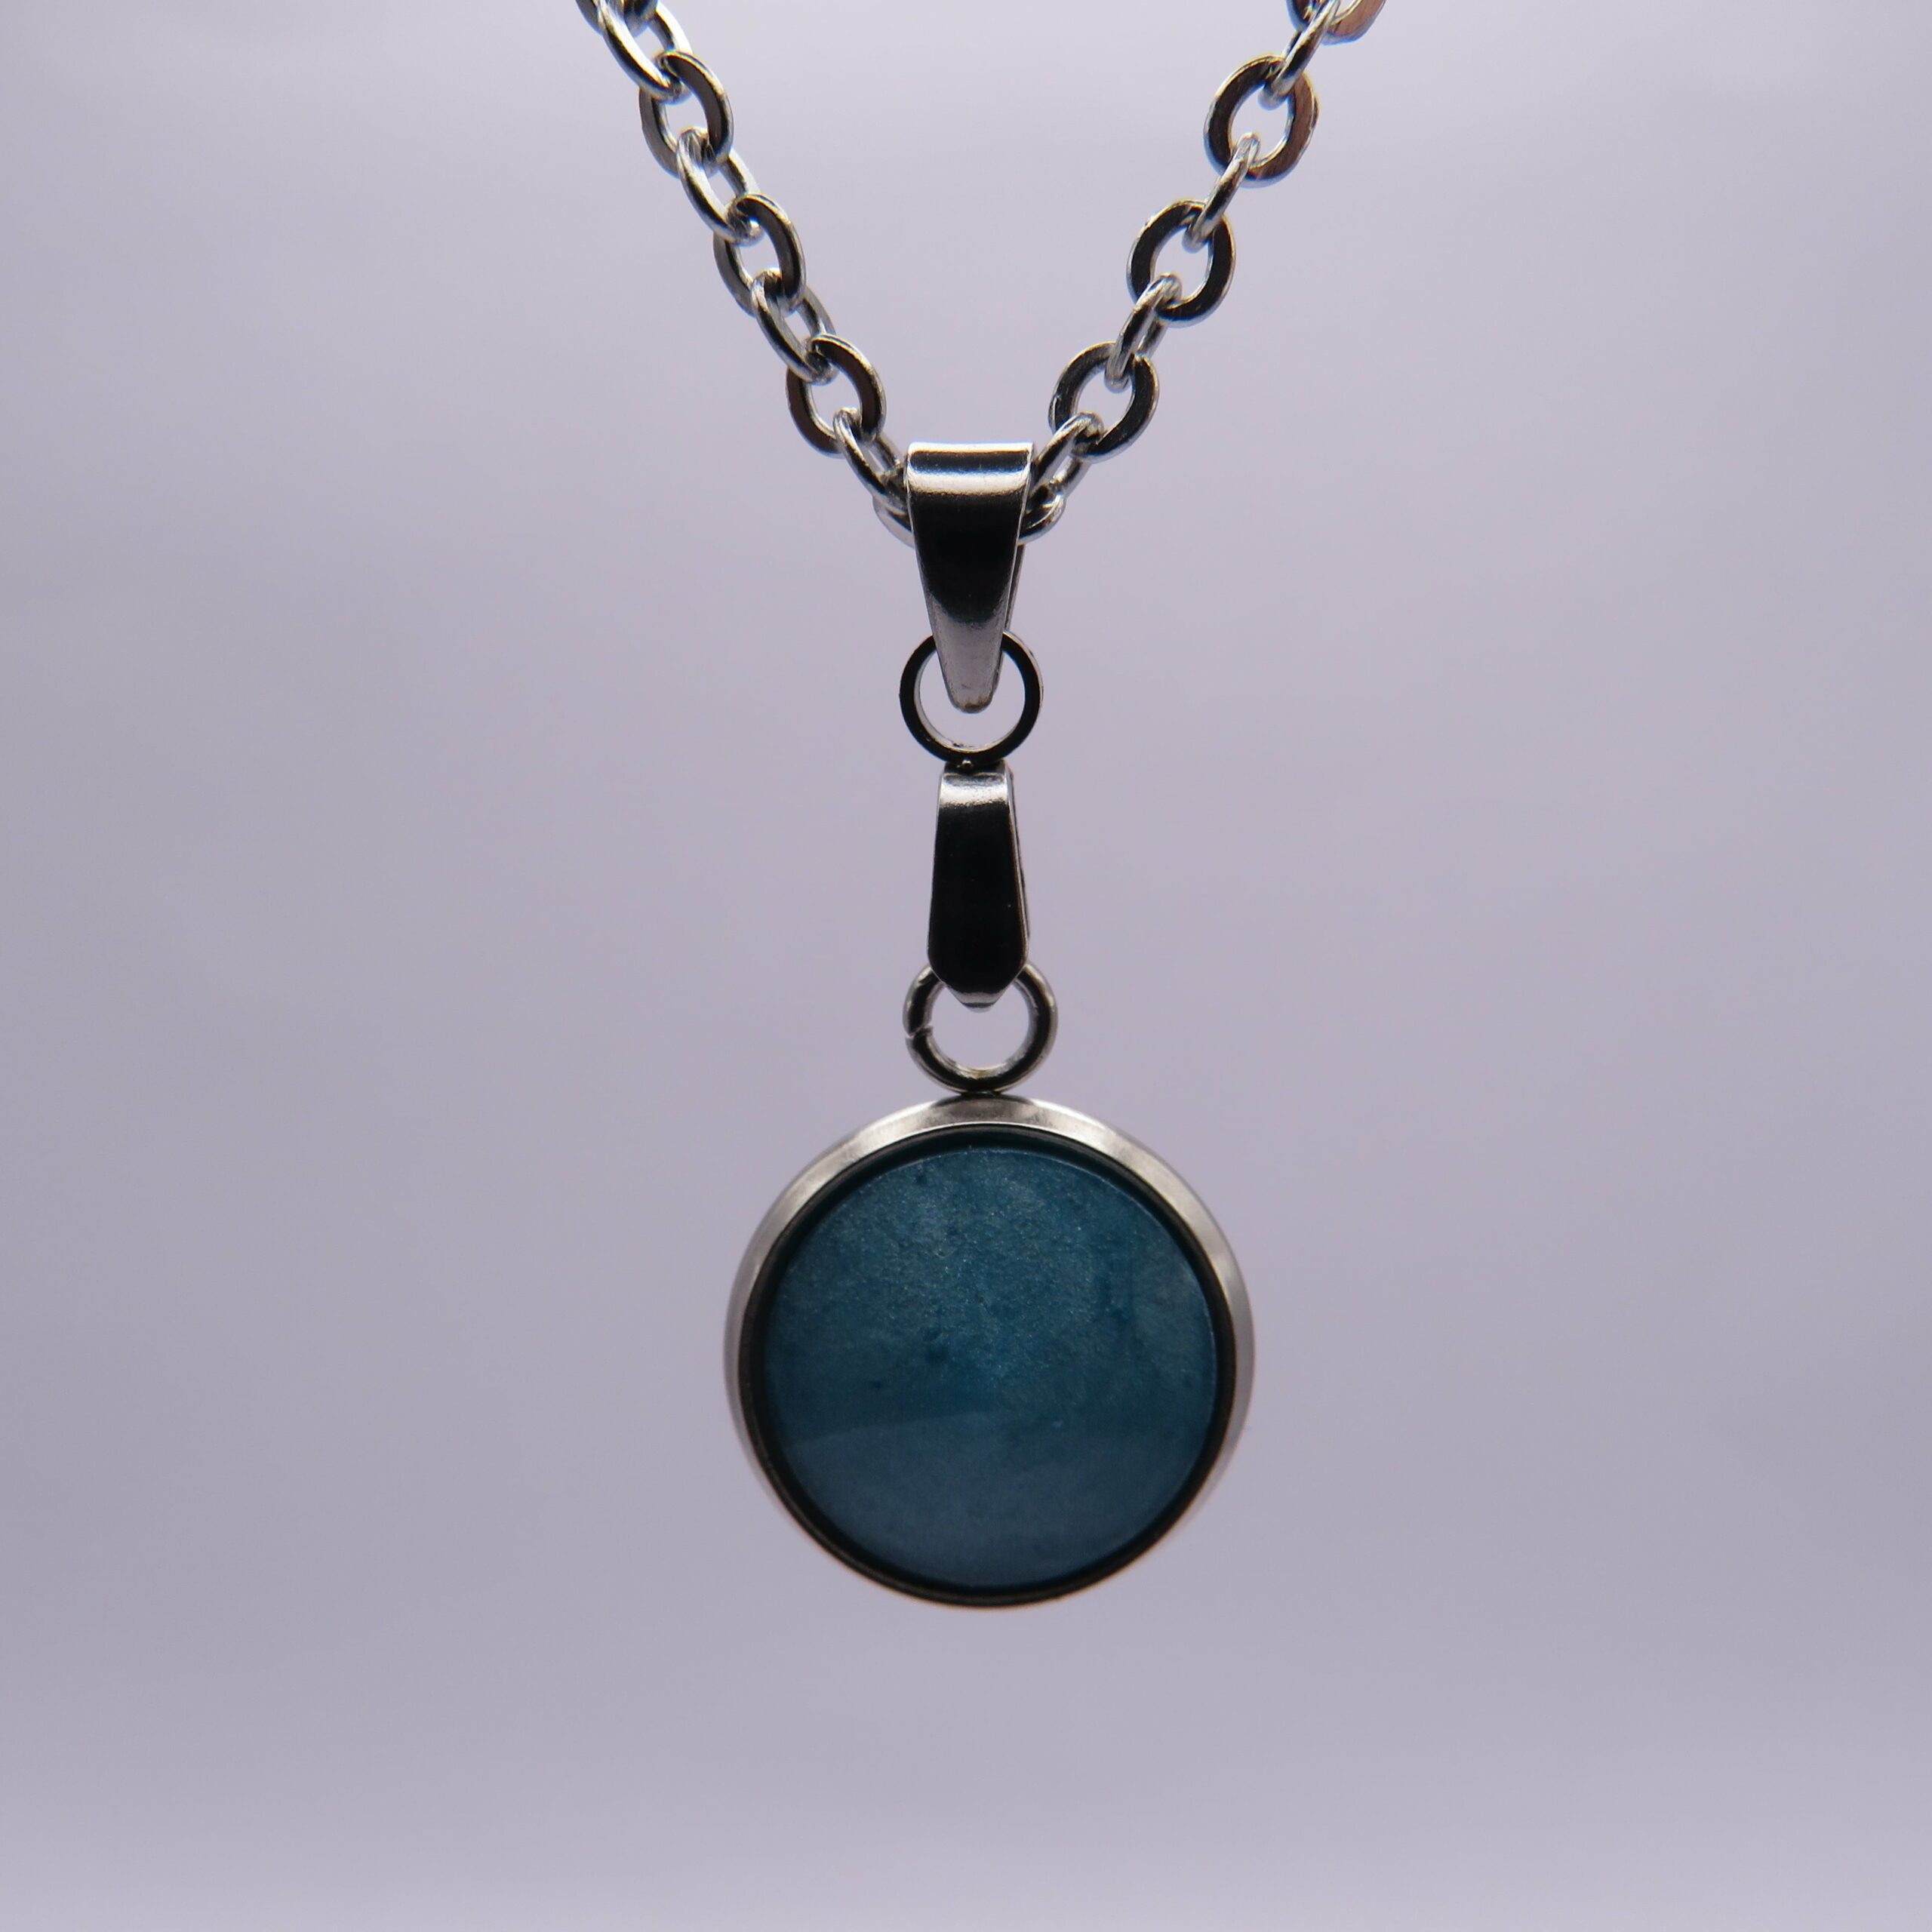 Stainless Steel Blue Cabochon Pendant Necklace